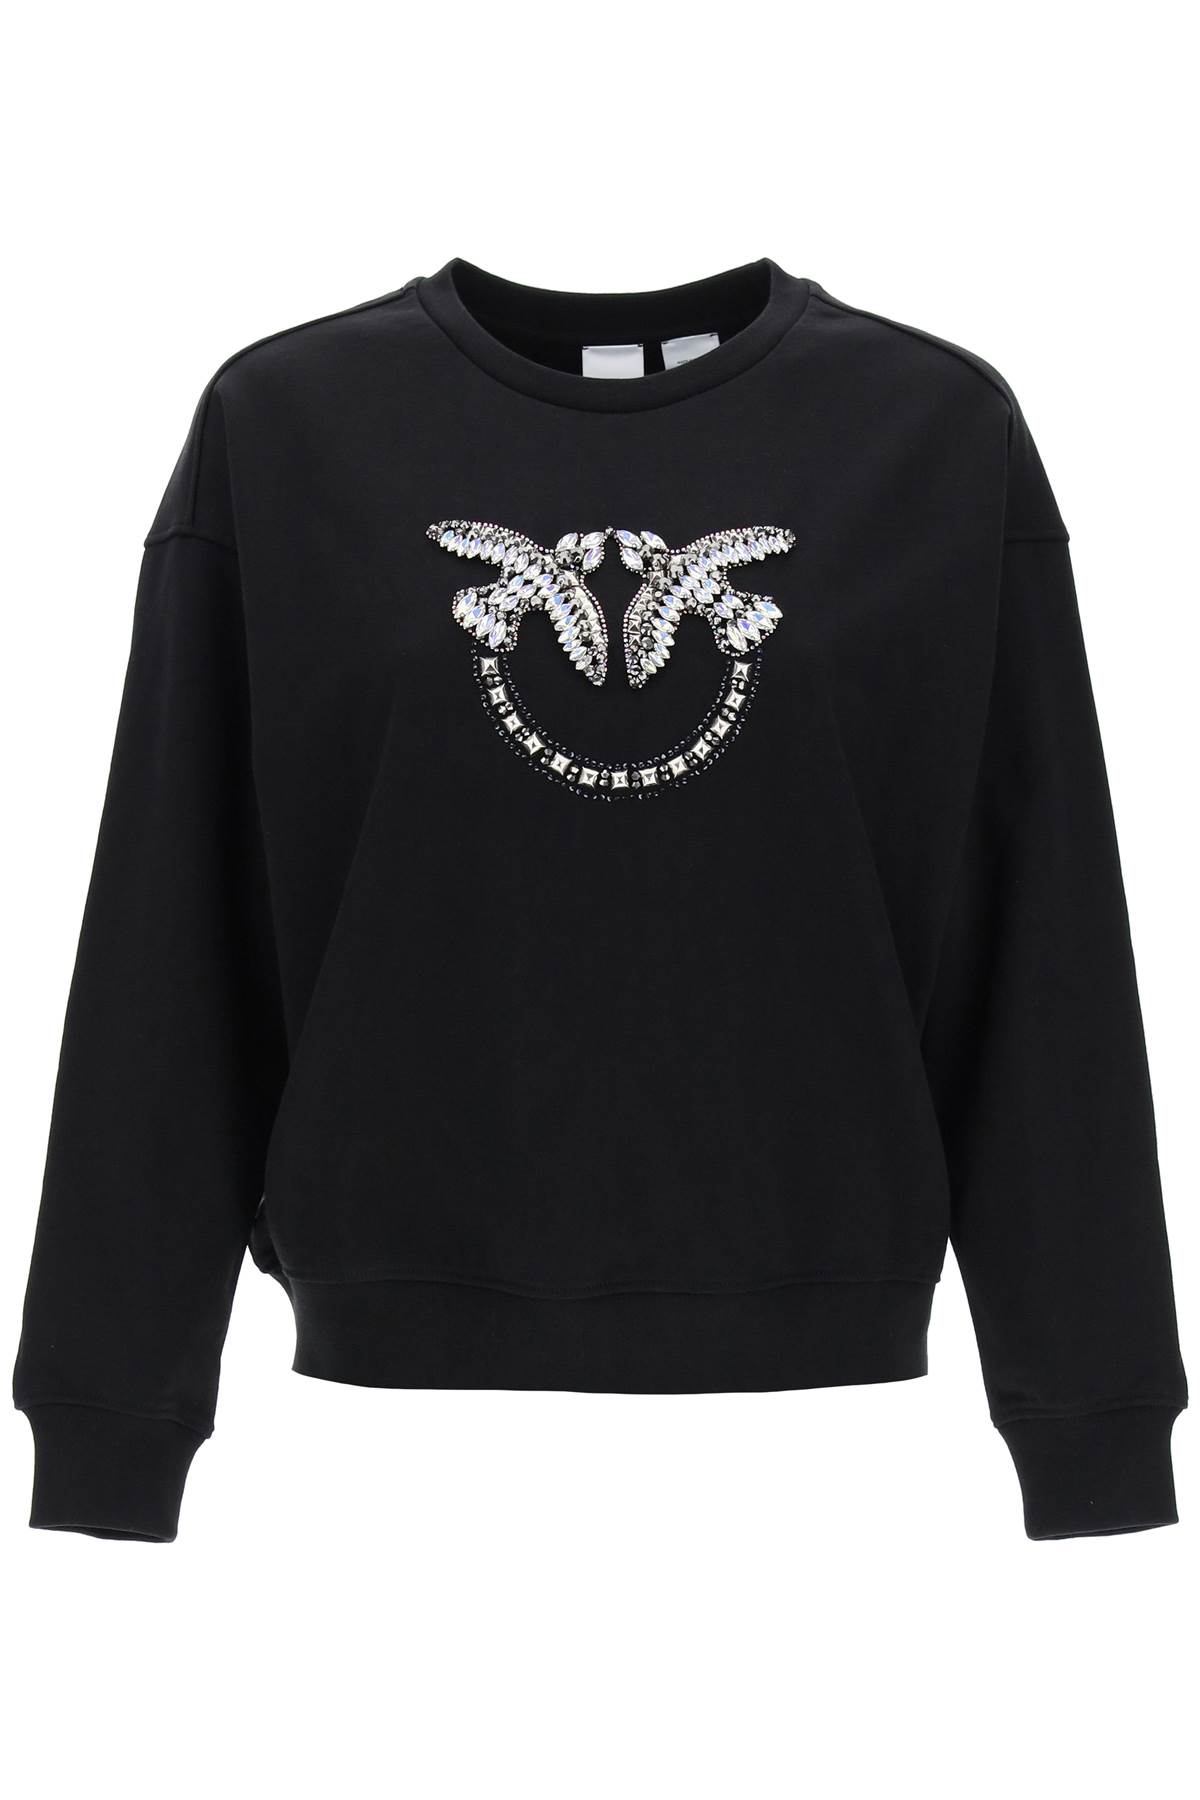 Nelly Sweatshirt With Love Birds Embroidery